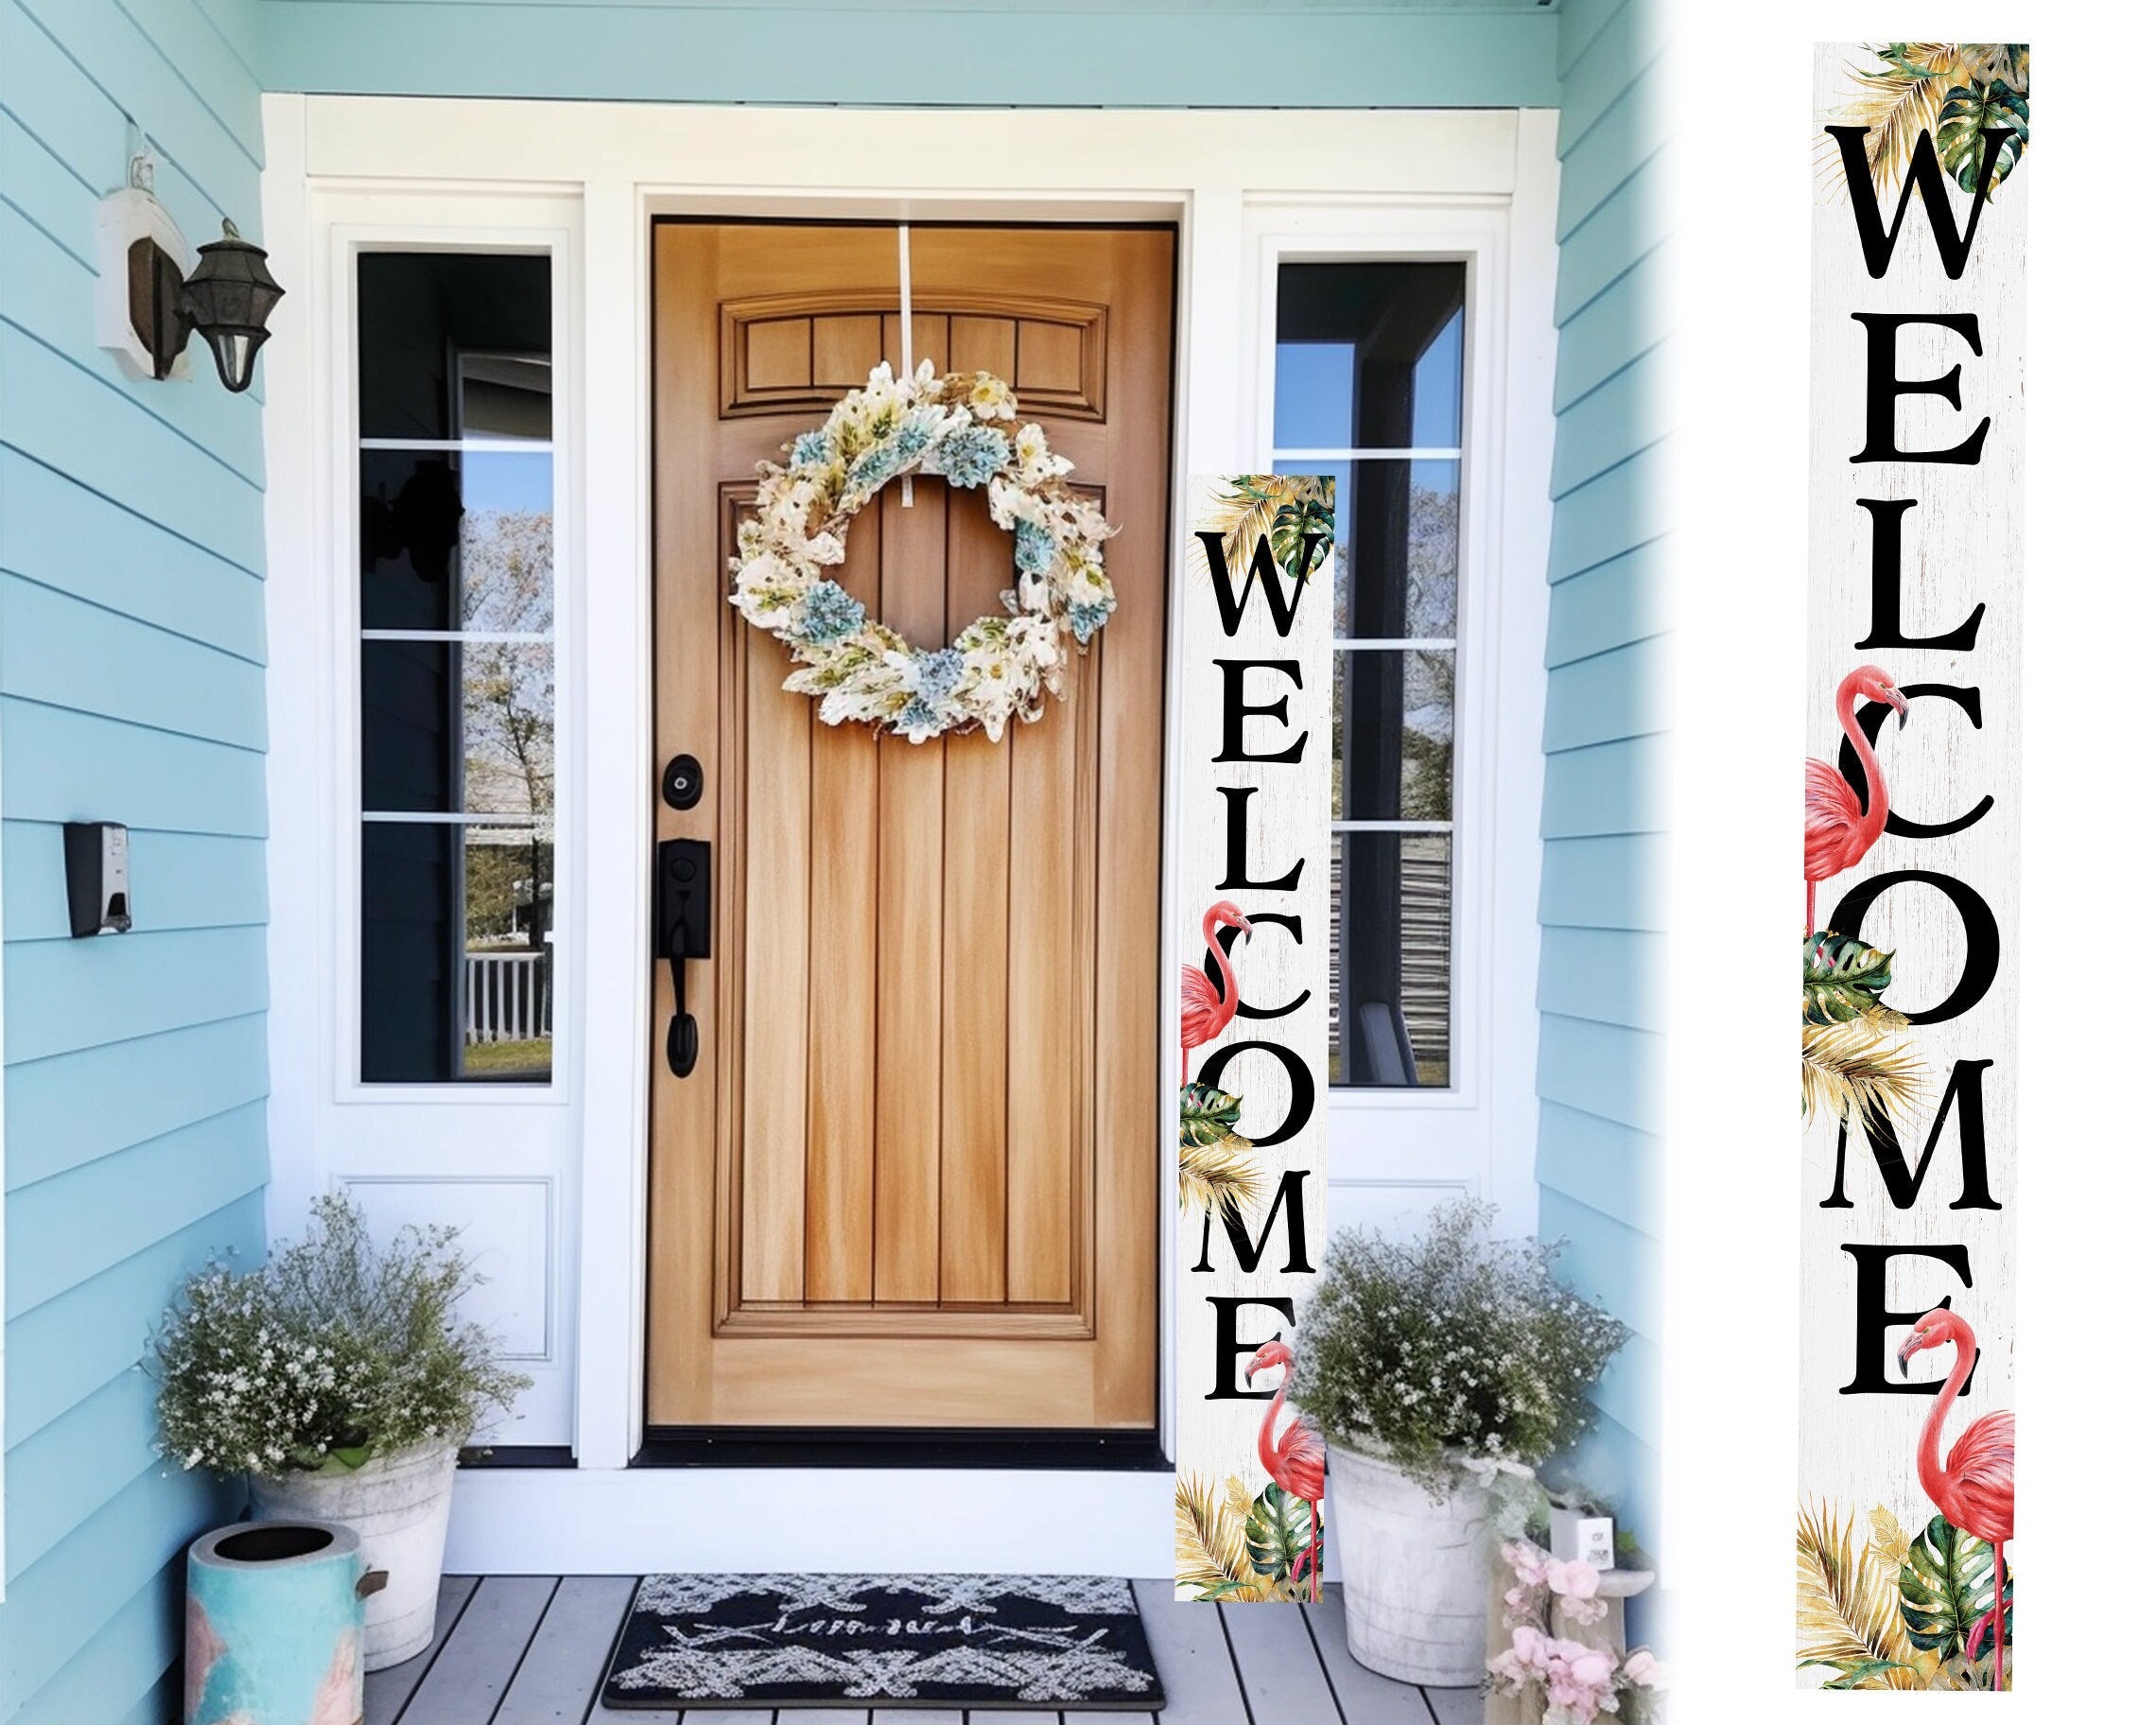 72in-Tall-Outdoor-Welcome-Sign-for-Front-Door-Porch-Decor-Coastal-Welcome-Sign-for-Farmhouse-Home-Decorations-Big-Summer-Welcome-Board-